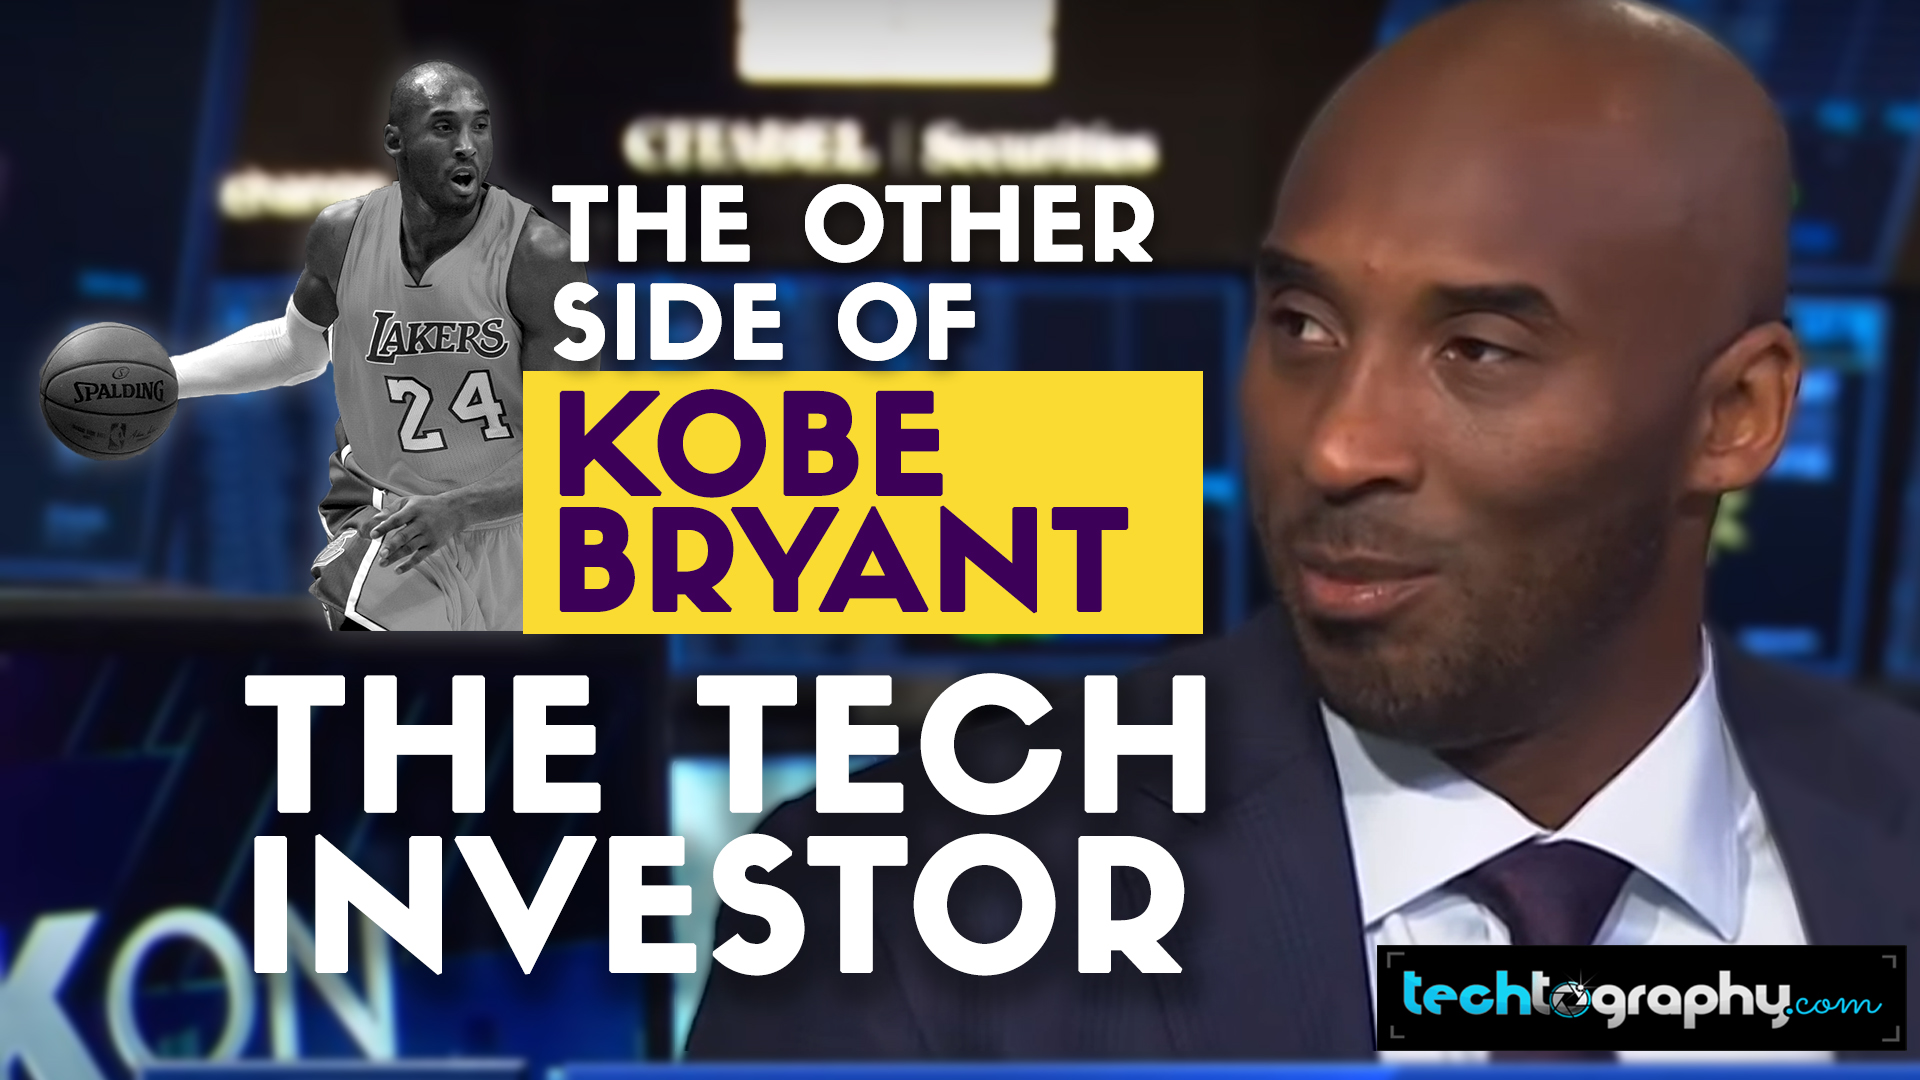 The Other Side of Kobe Bryant: The Tech Investor